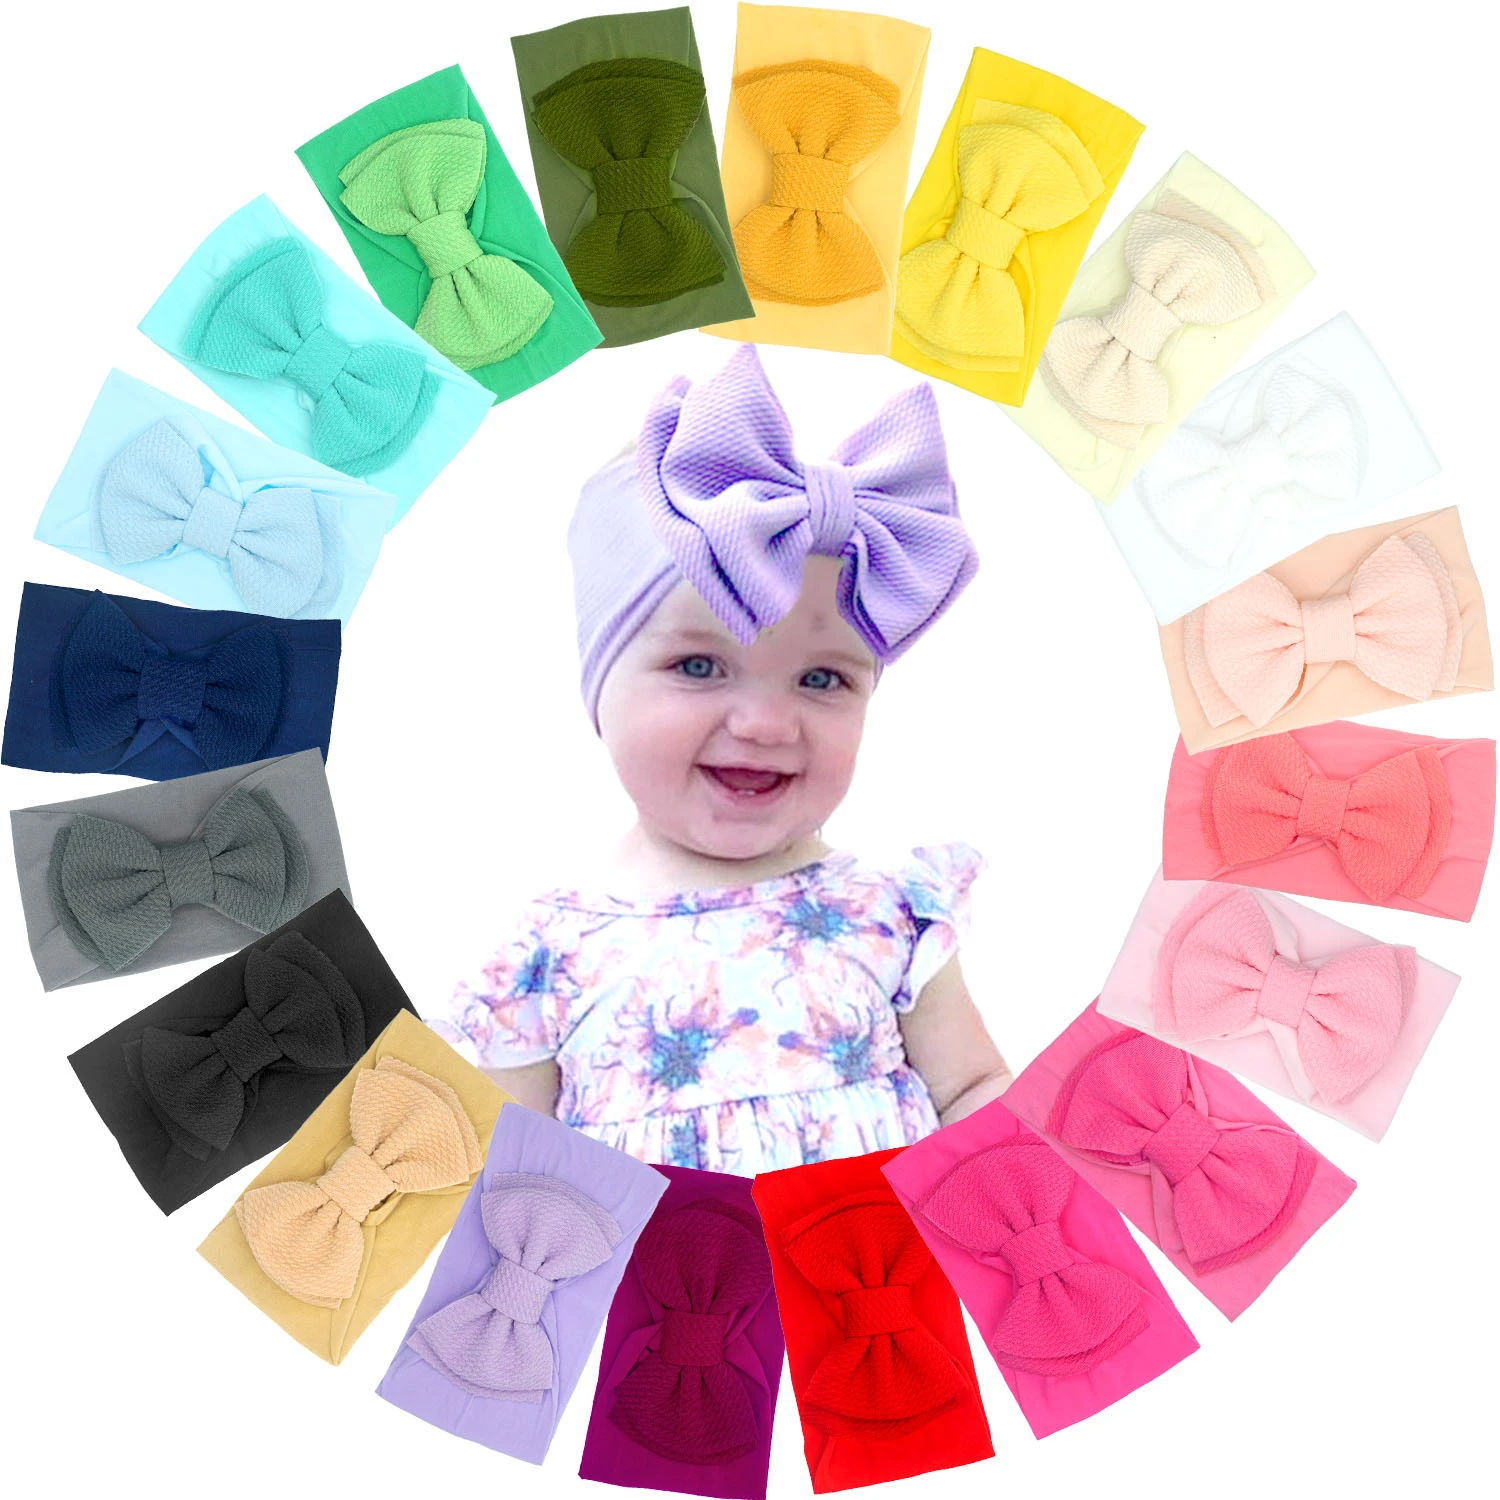 20 Colors Baby Girl's Headbands 4.5 Inch Hair Bows Soft Wide Nylon Headbands for Newborn Infant Toddler Photographic Accessorie